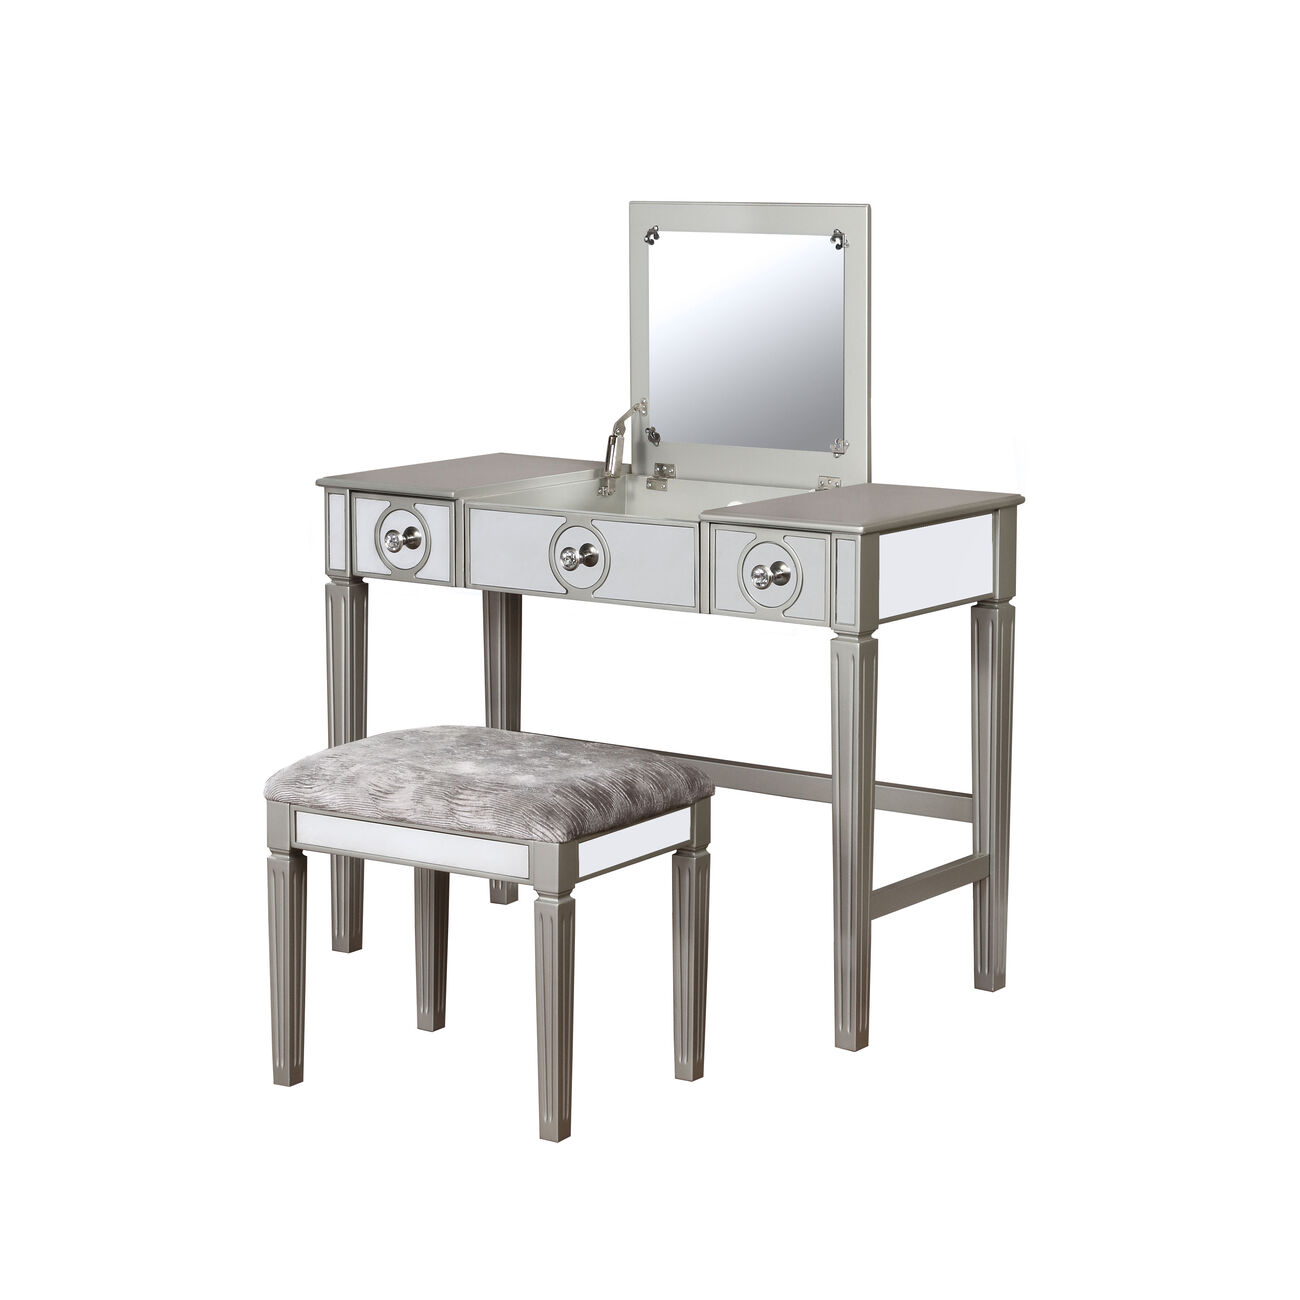 2 Drawer Flip Top Wooden Vanity Set with Mirrored Accents, Silver and Gray